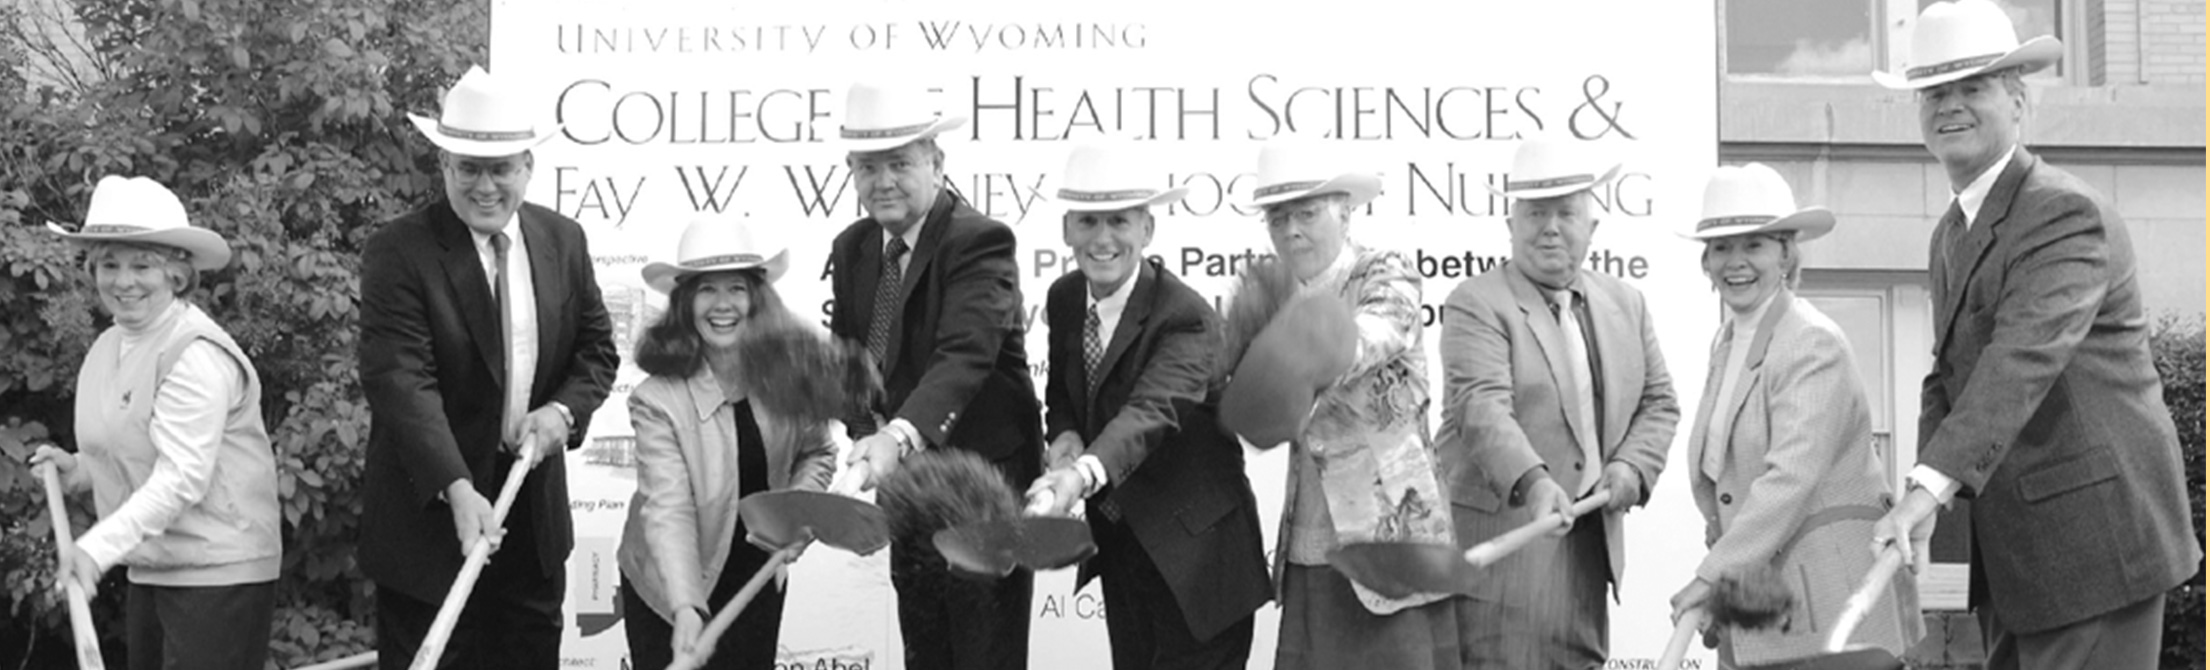 Groundbreaking ceremony for the College of Health Sciences (including Nursing) Building